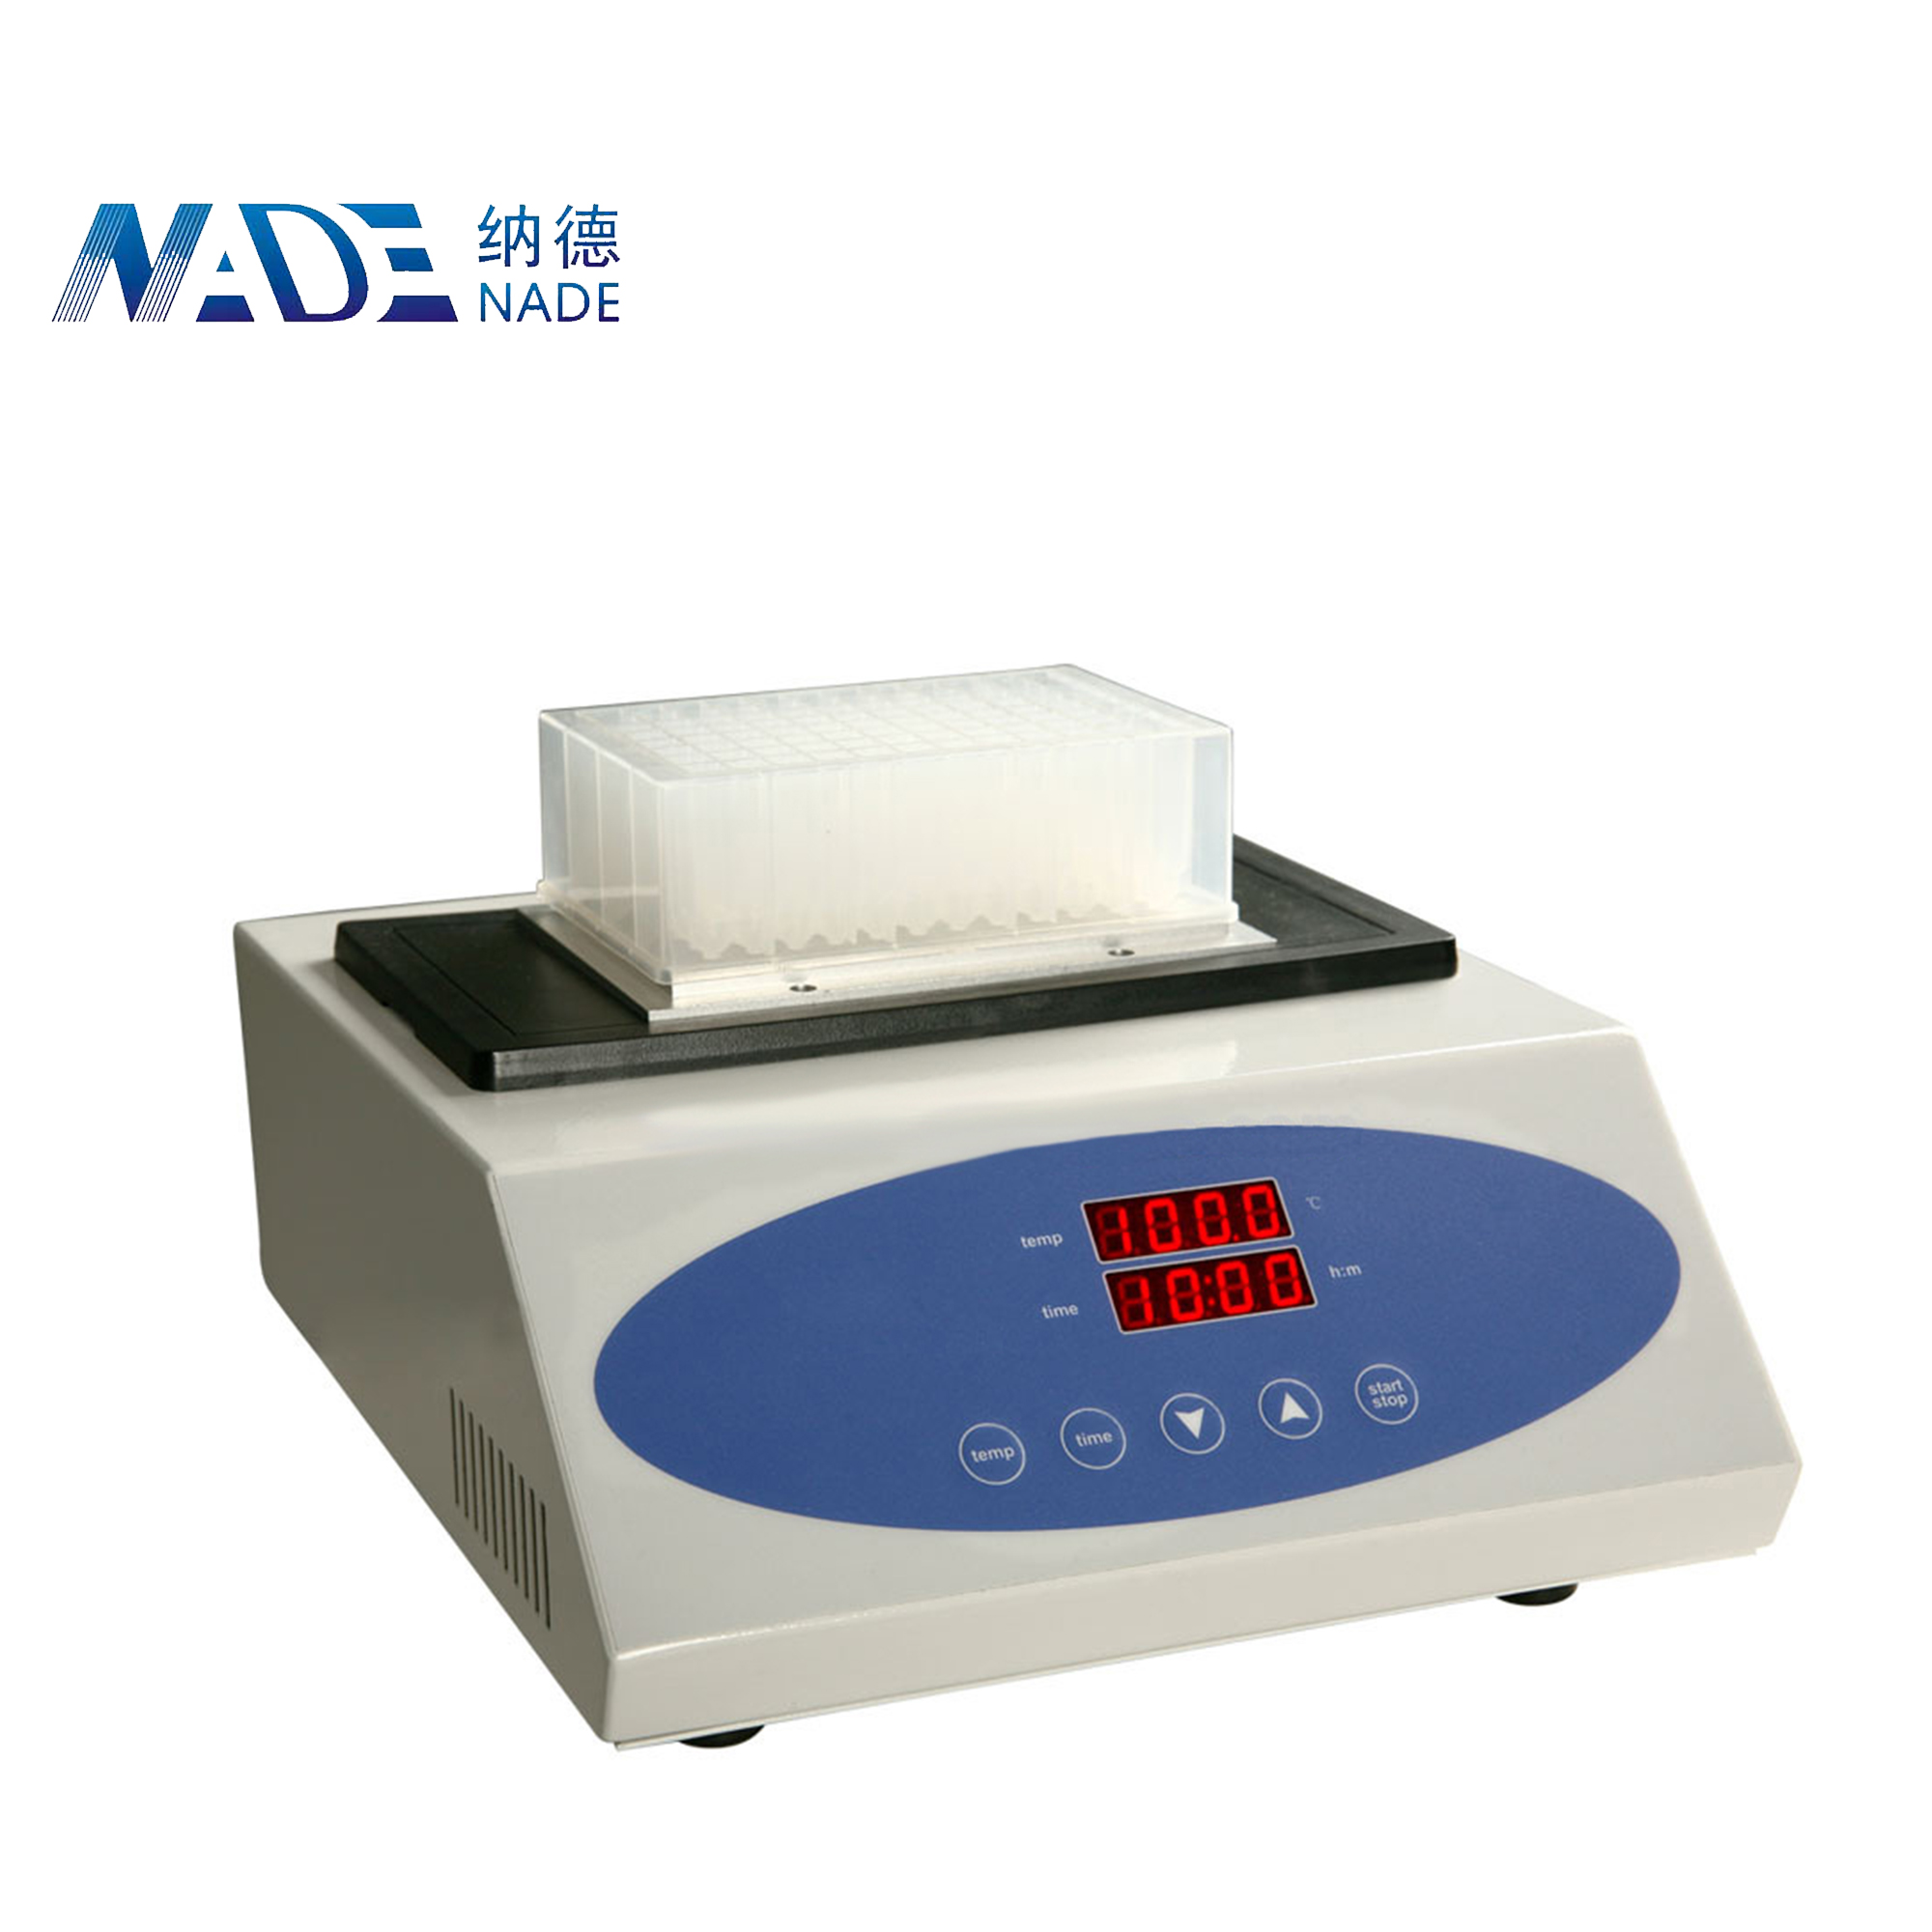 Nade Laboratory Thermostatic Devices Dry Bath Incubator MK200-2 +5-150C Dry Block Heaters